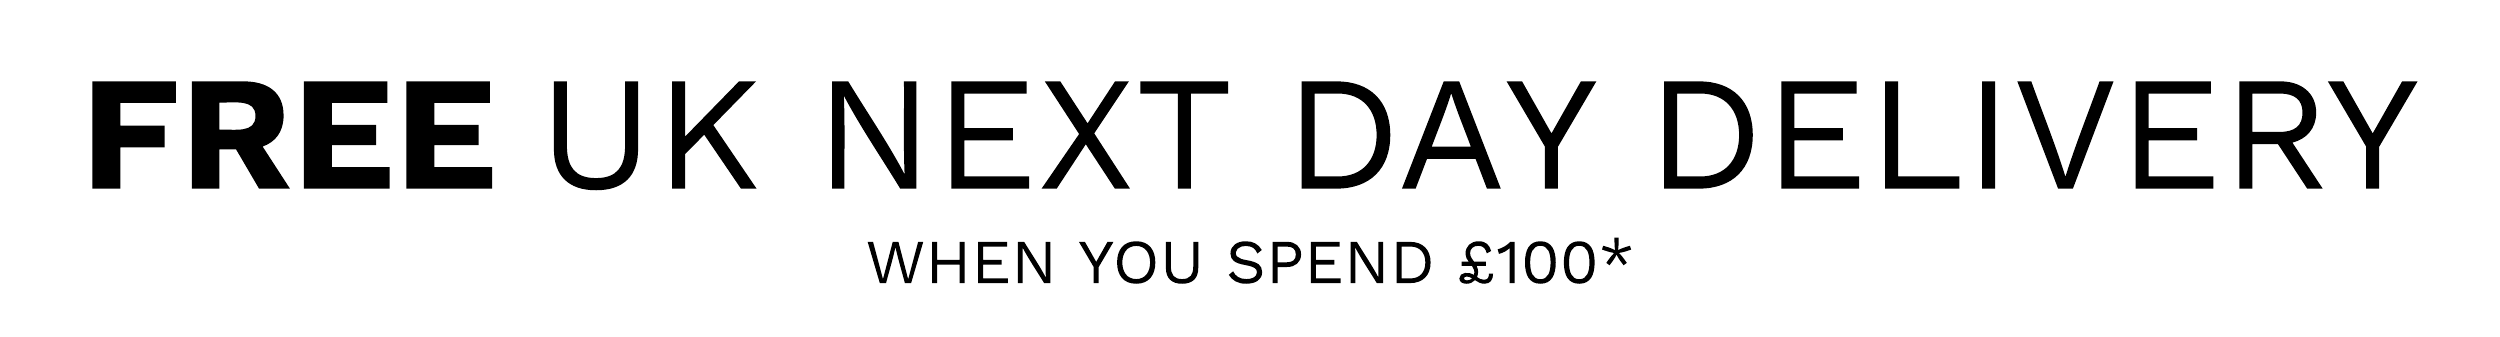 Free UK Next Day Delivery* When you spend £100